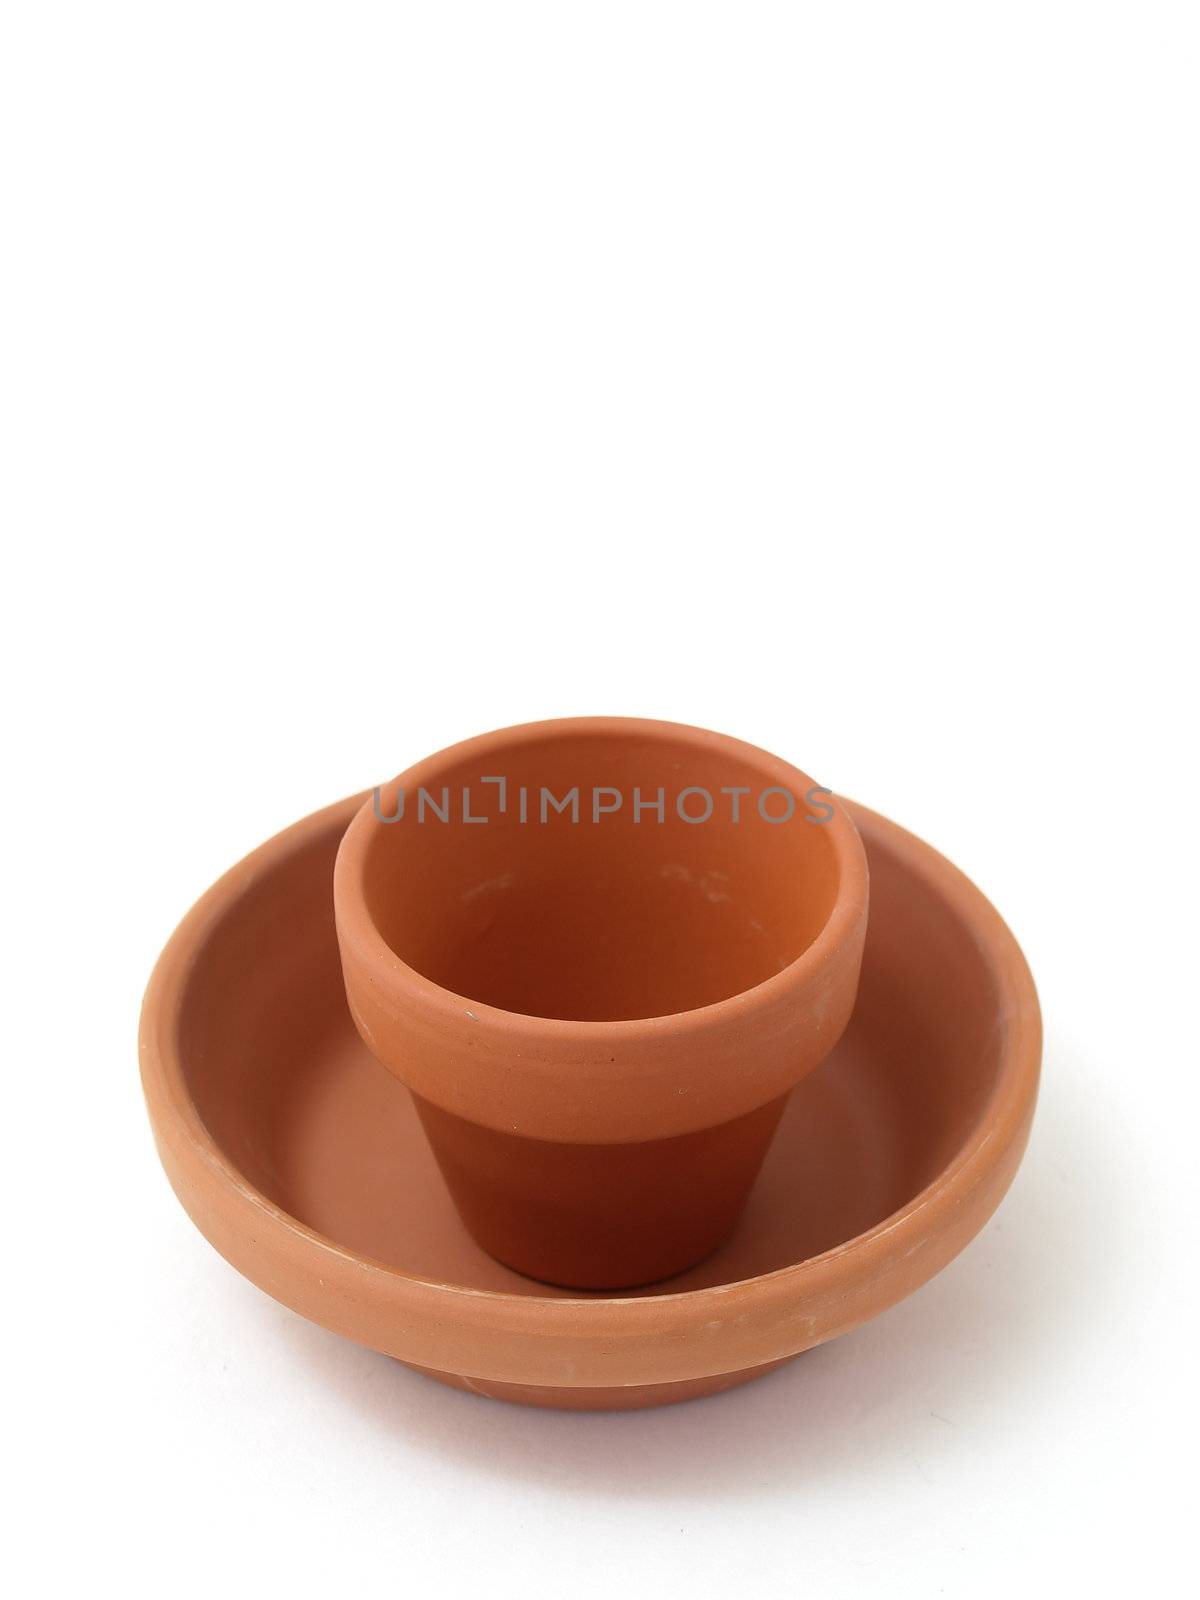 Mini Pot in Saucer by RGebbiePhoto